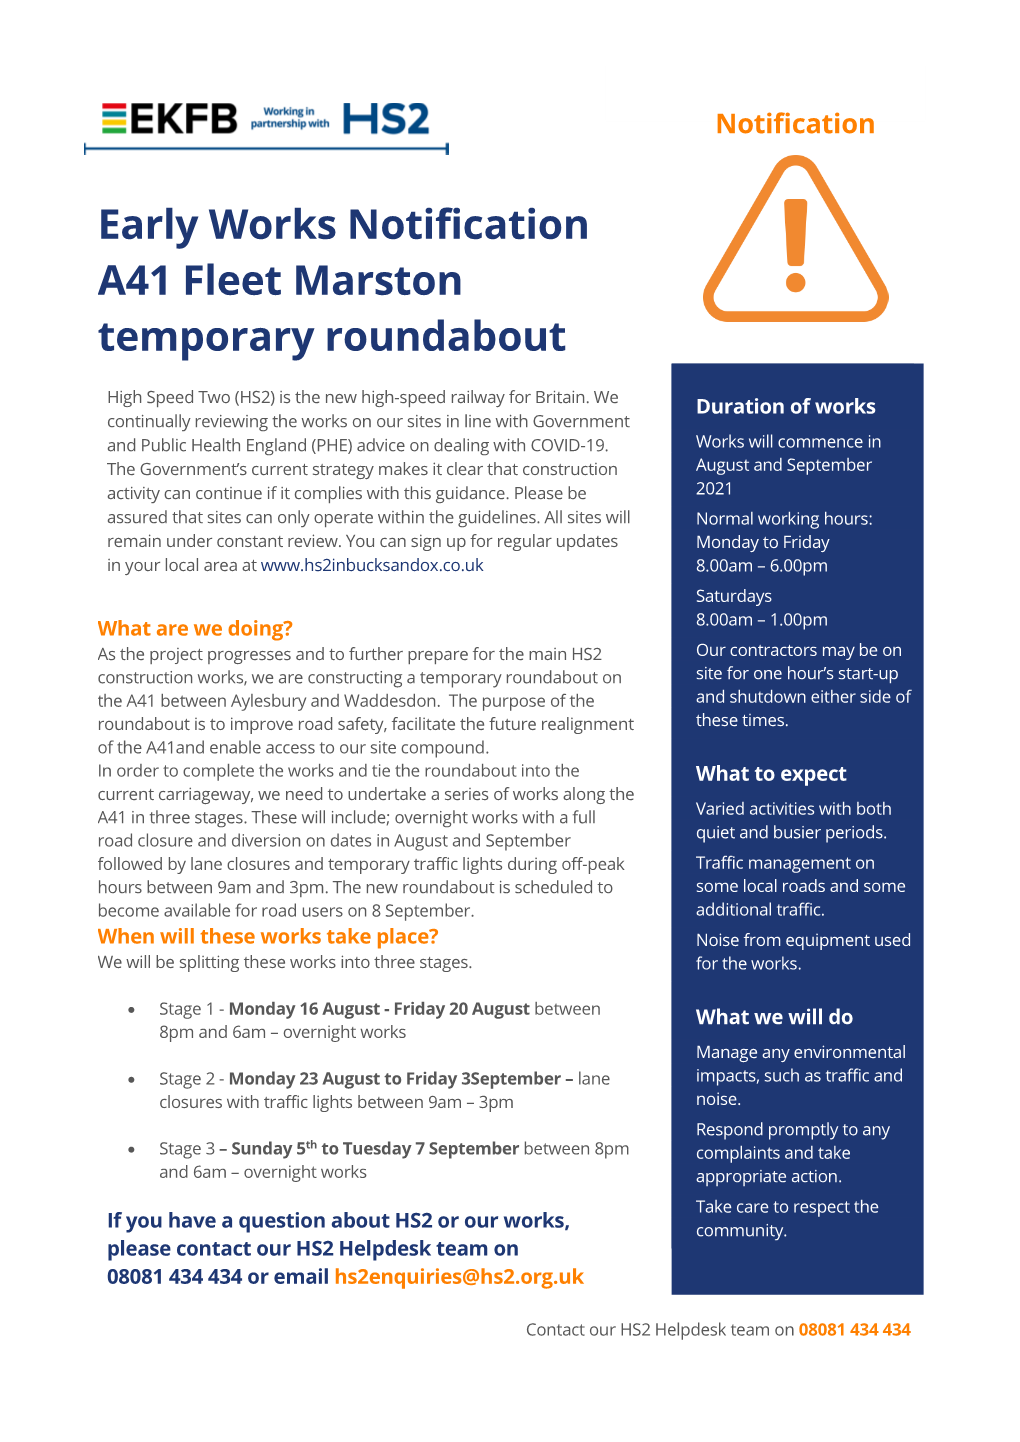 Early Works Notification A41 Fleet Marston Temporary Roundabout March 2021 | High Speed Two (HS2) Is the New High-Speed Railway for Britain